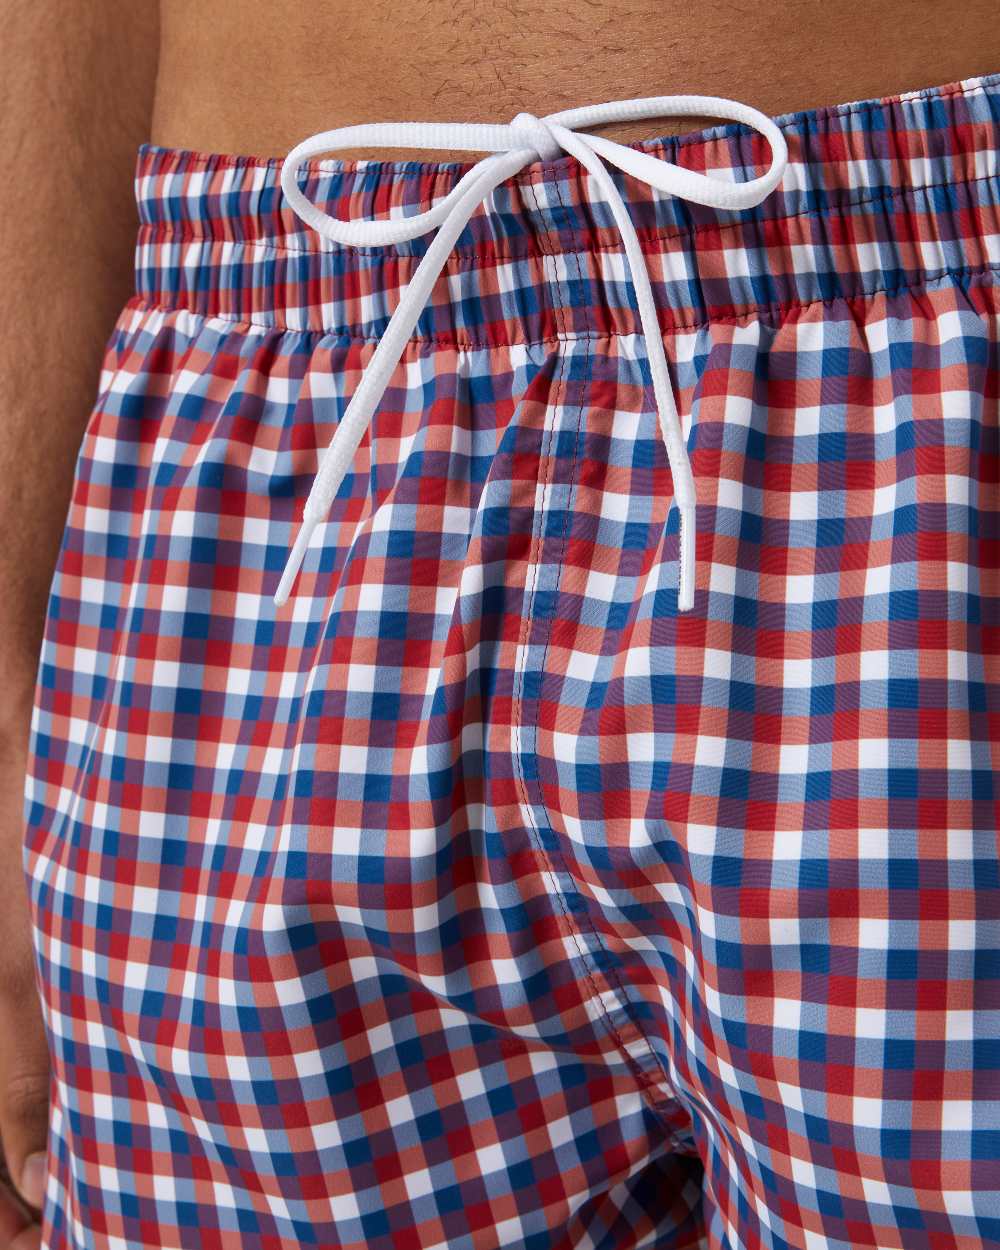 Red/Deep Fjord Coloured Helly Hansen Mens Newport Swim Trunks On A White Background 